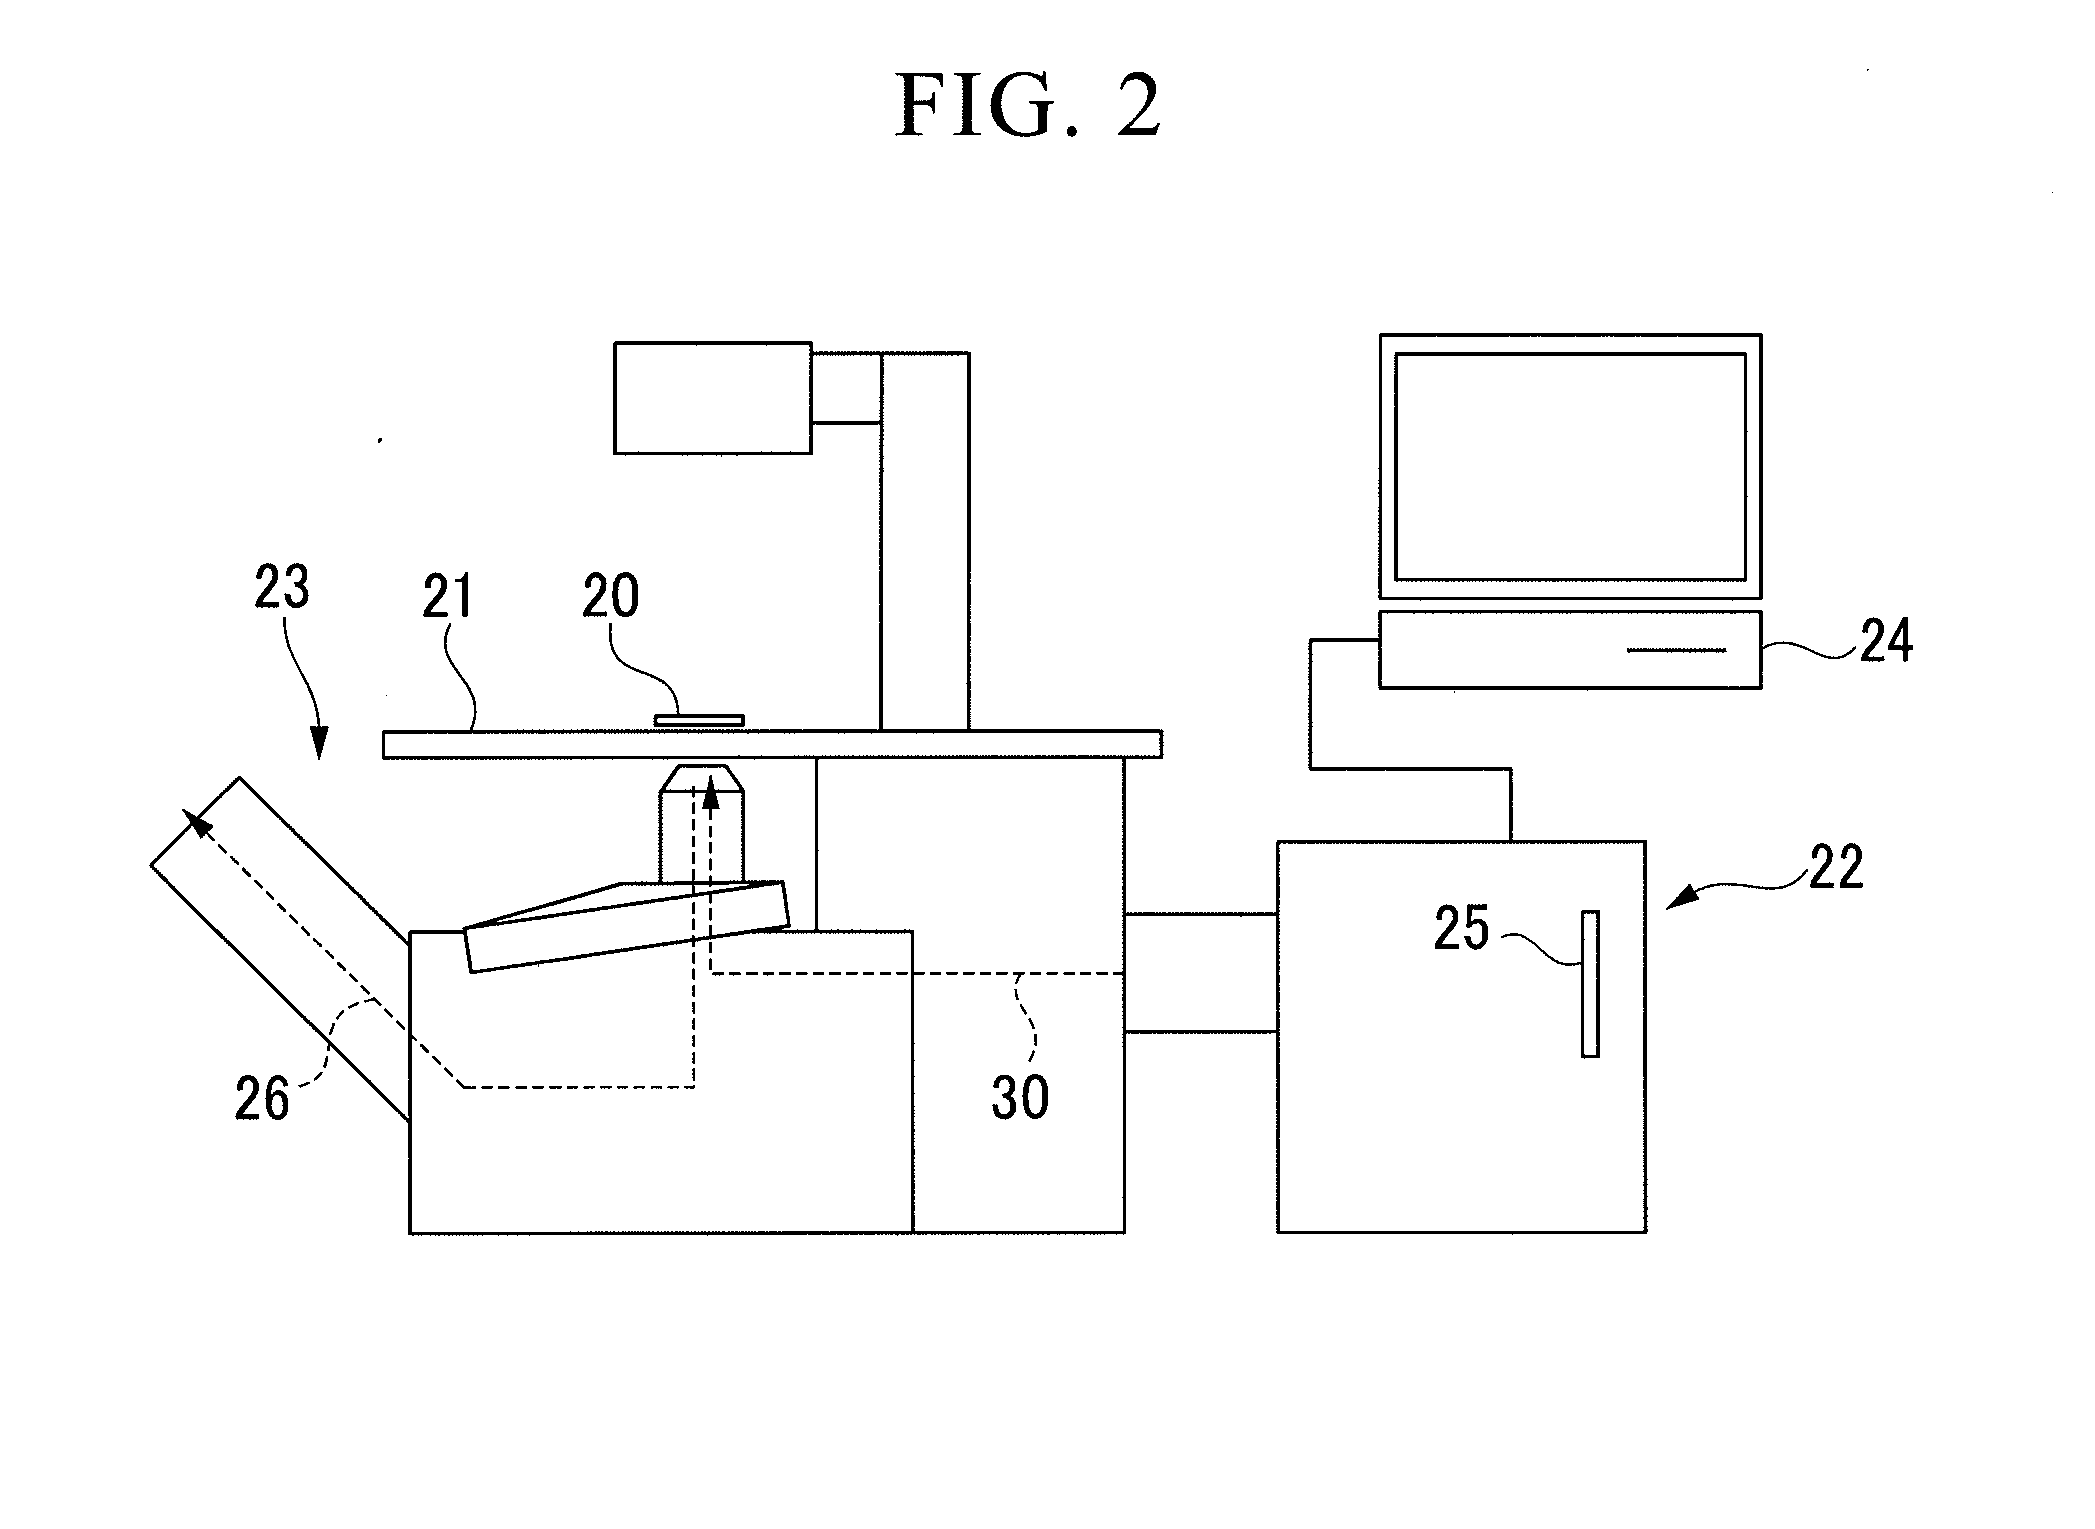 Method for separating cells, cell culture substrate, and device for separating cells